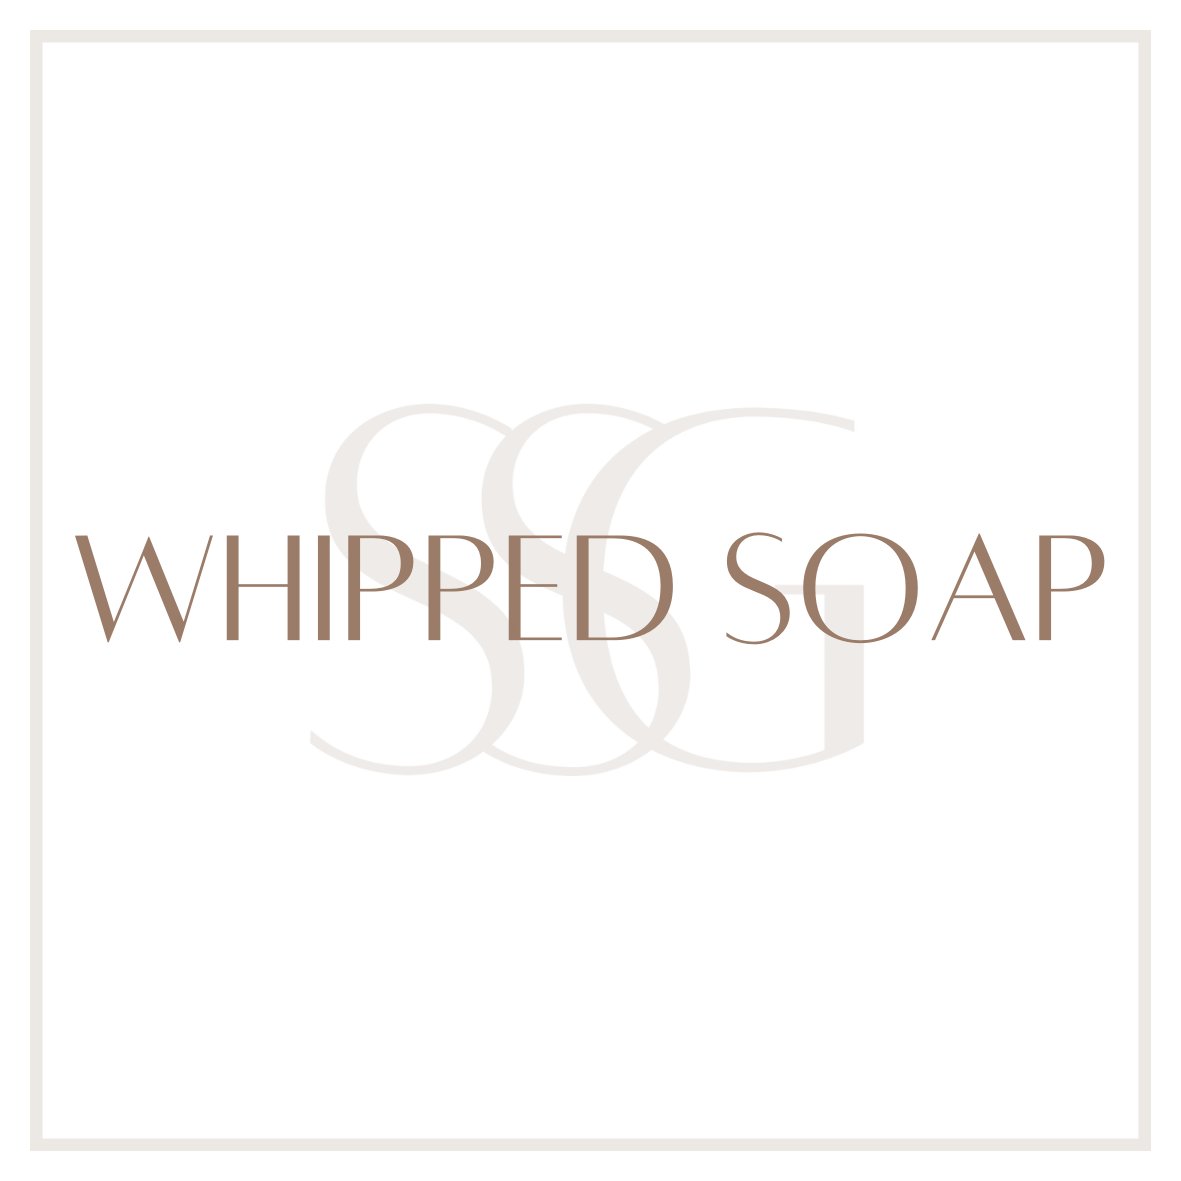 WHIPPED SOAP